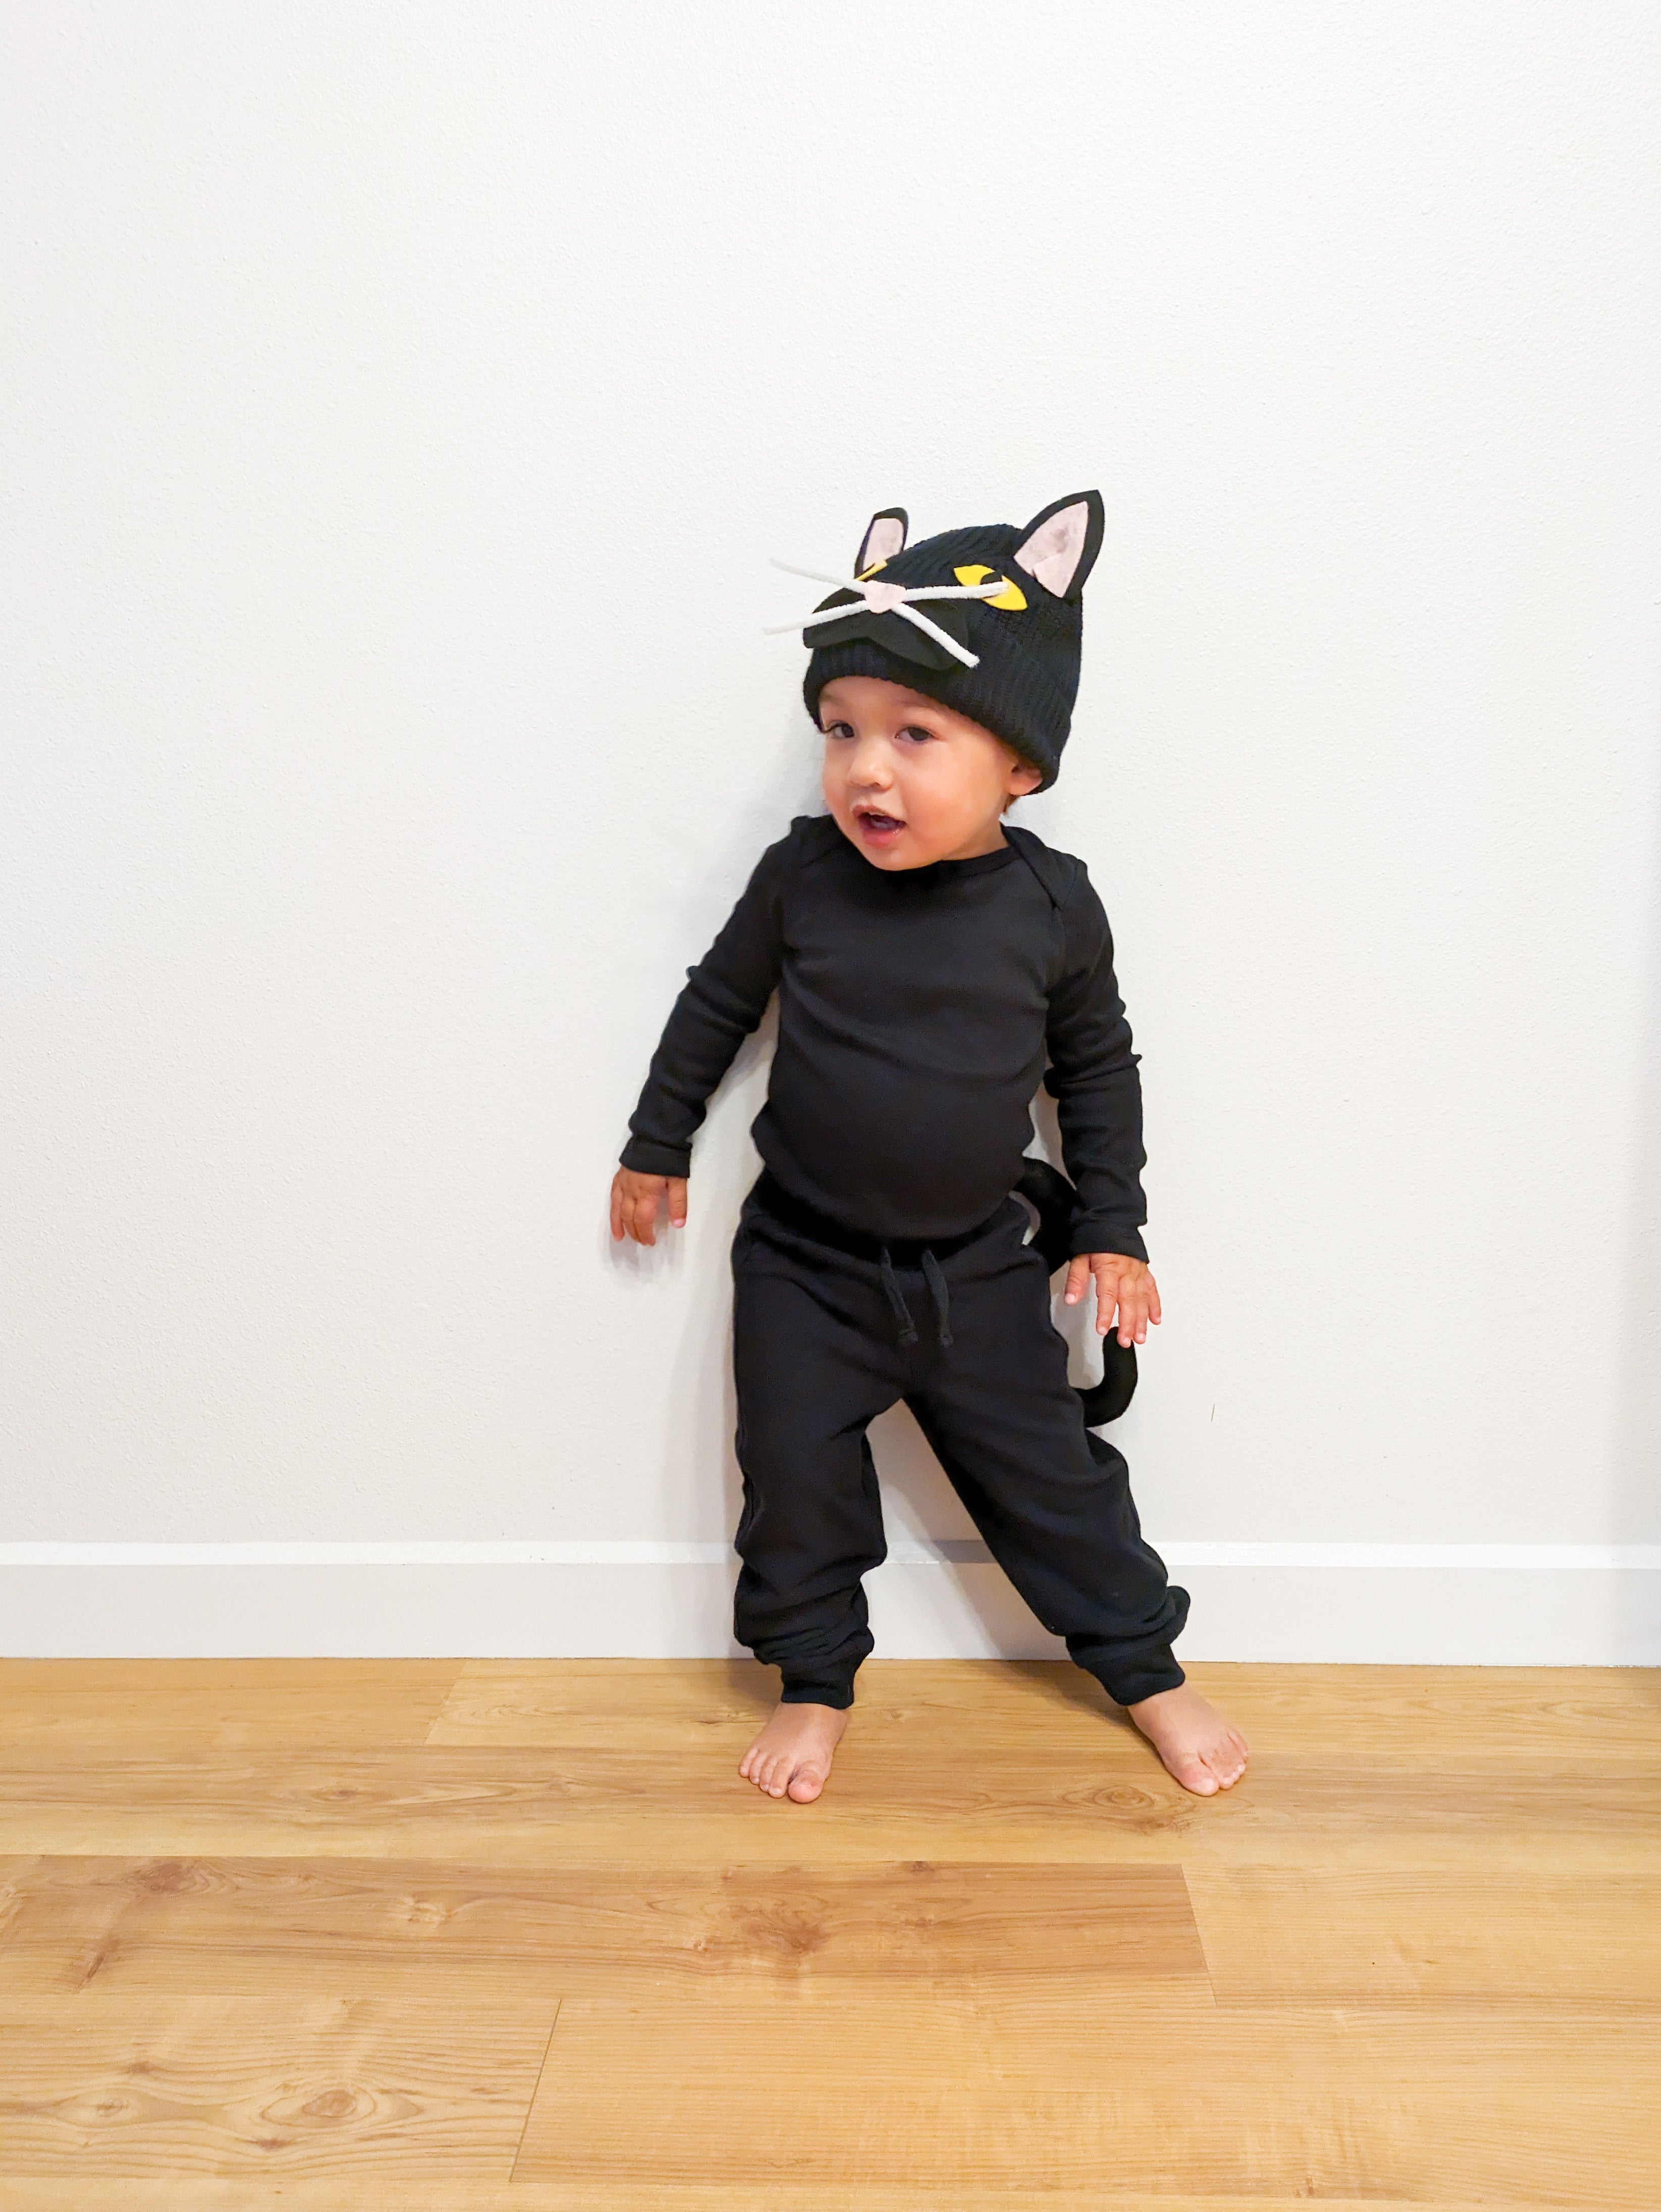 A toddler dressed as a black cat, in a black romper with DIY ears and whiskers attached to a black hat